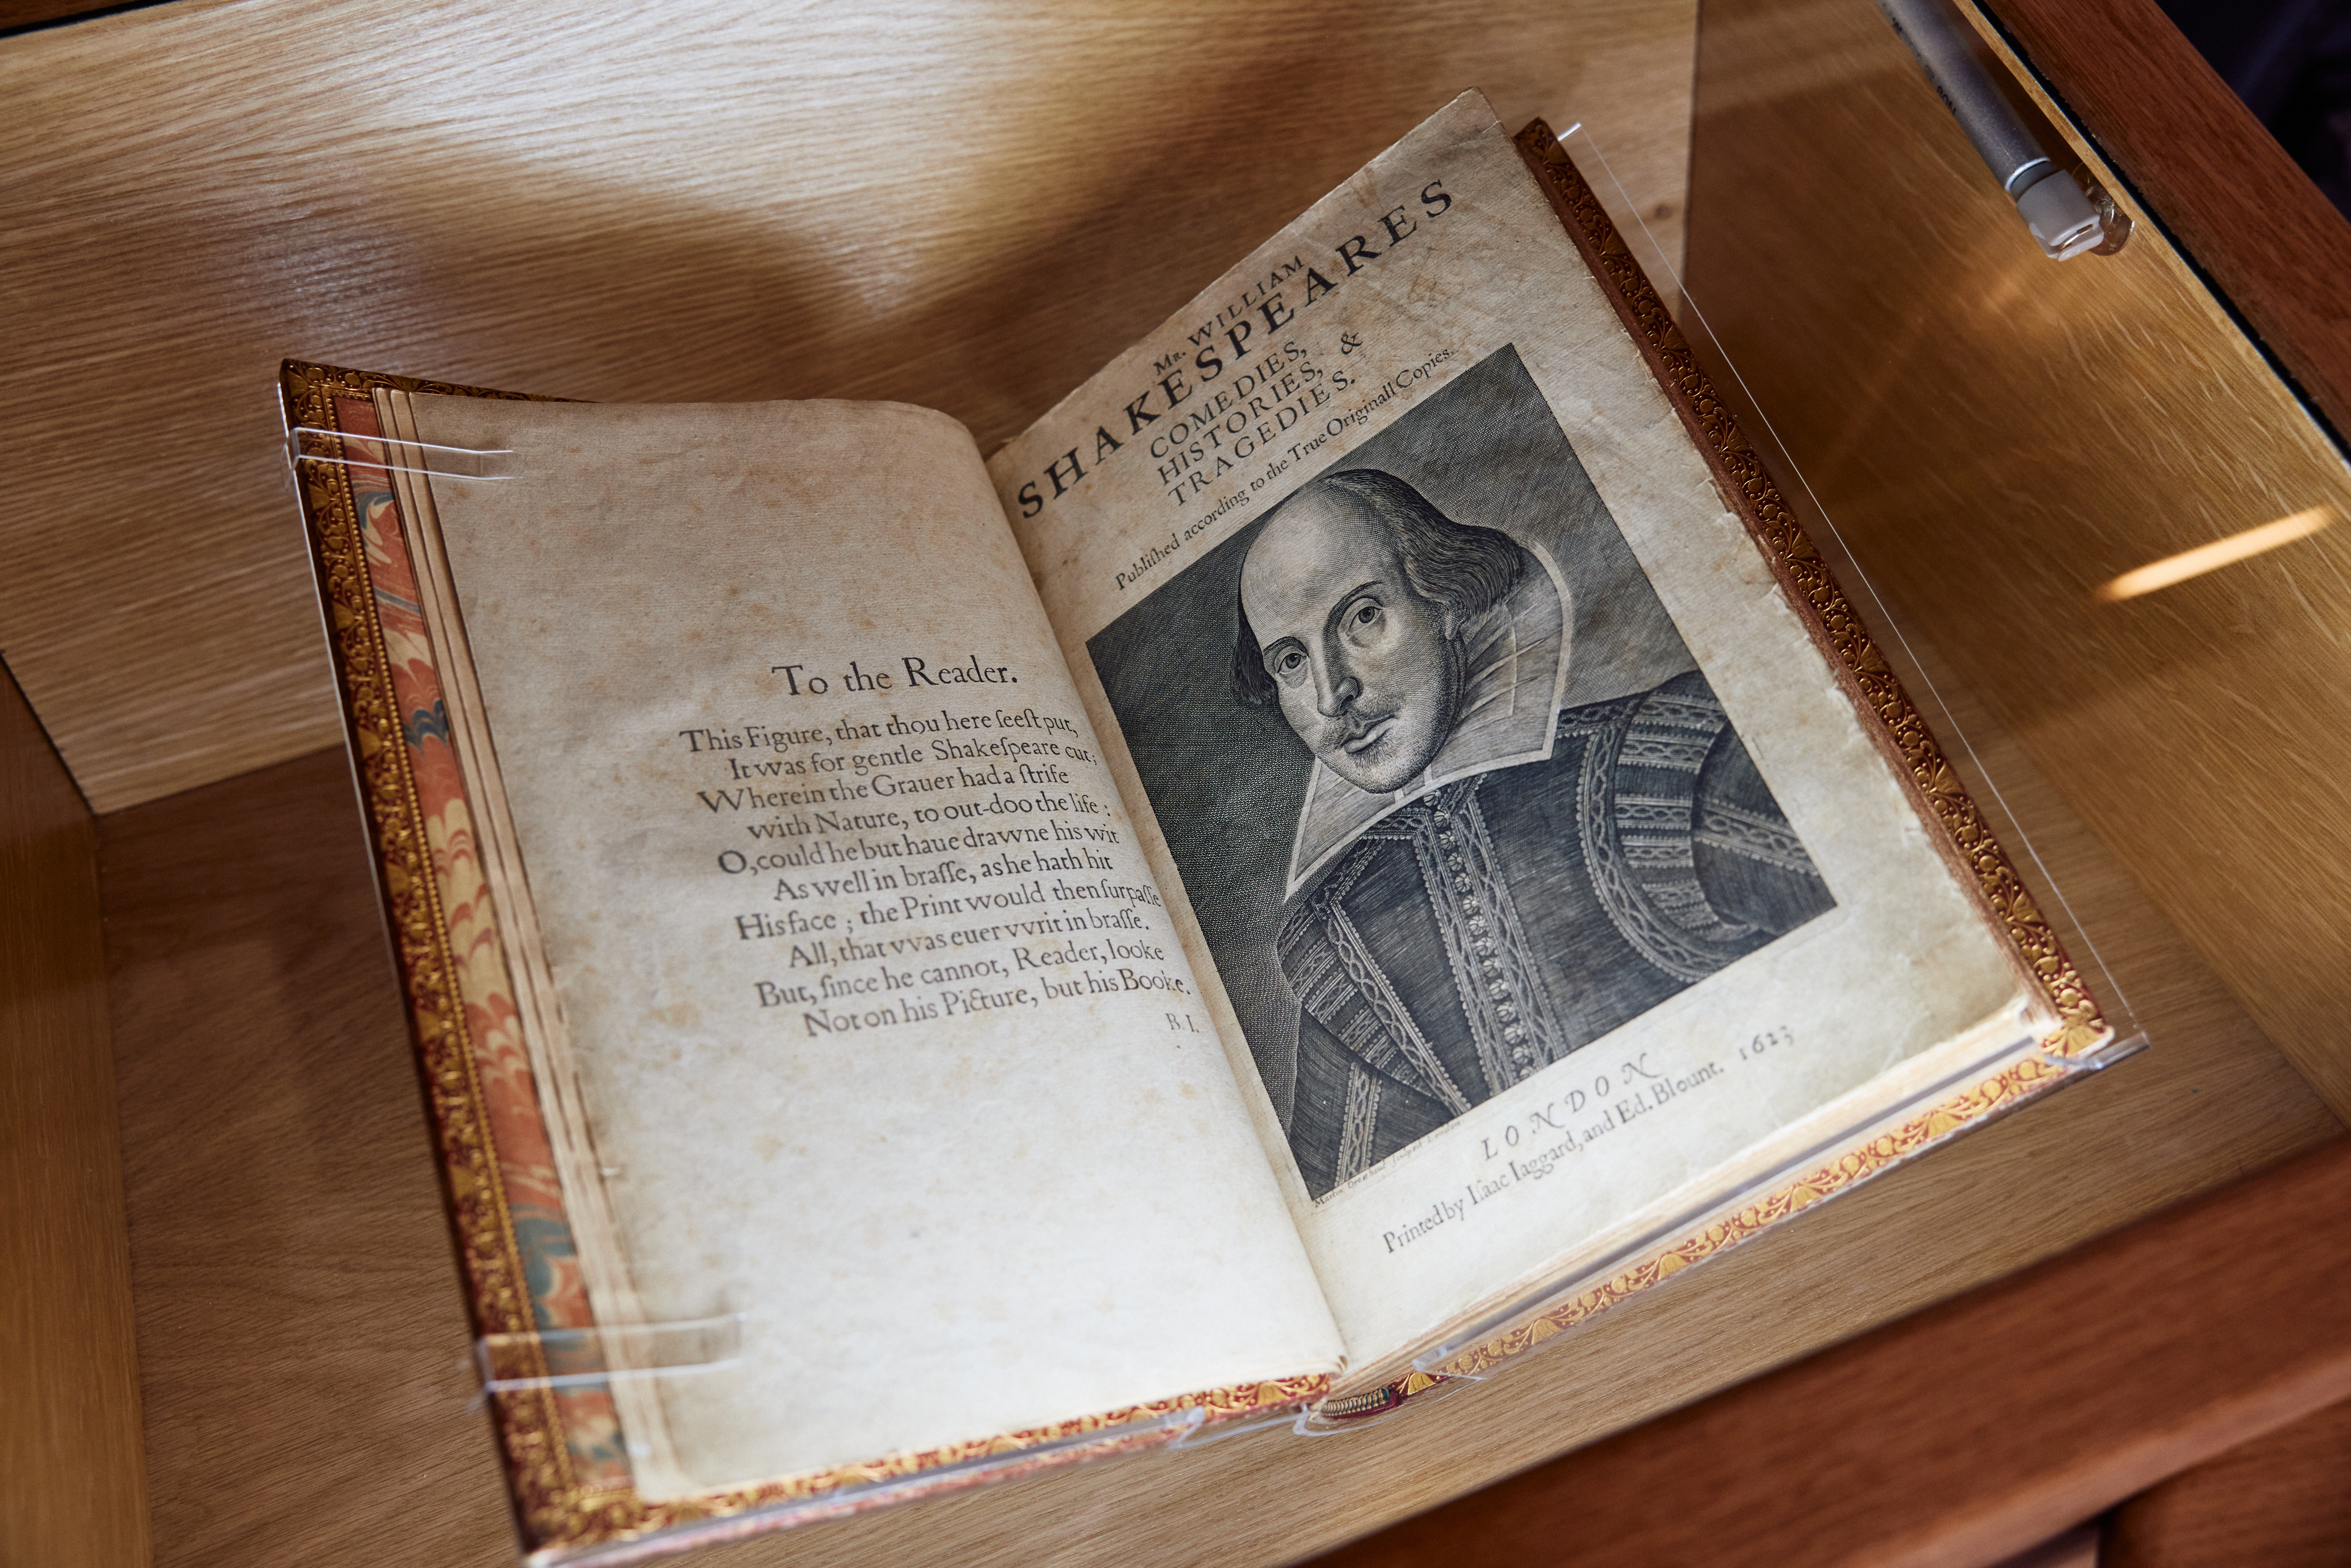 Shakespeare First Folio open on page showing portrait of Shakespeare